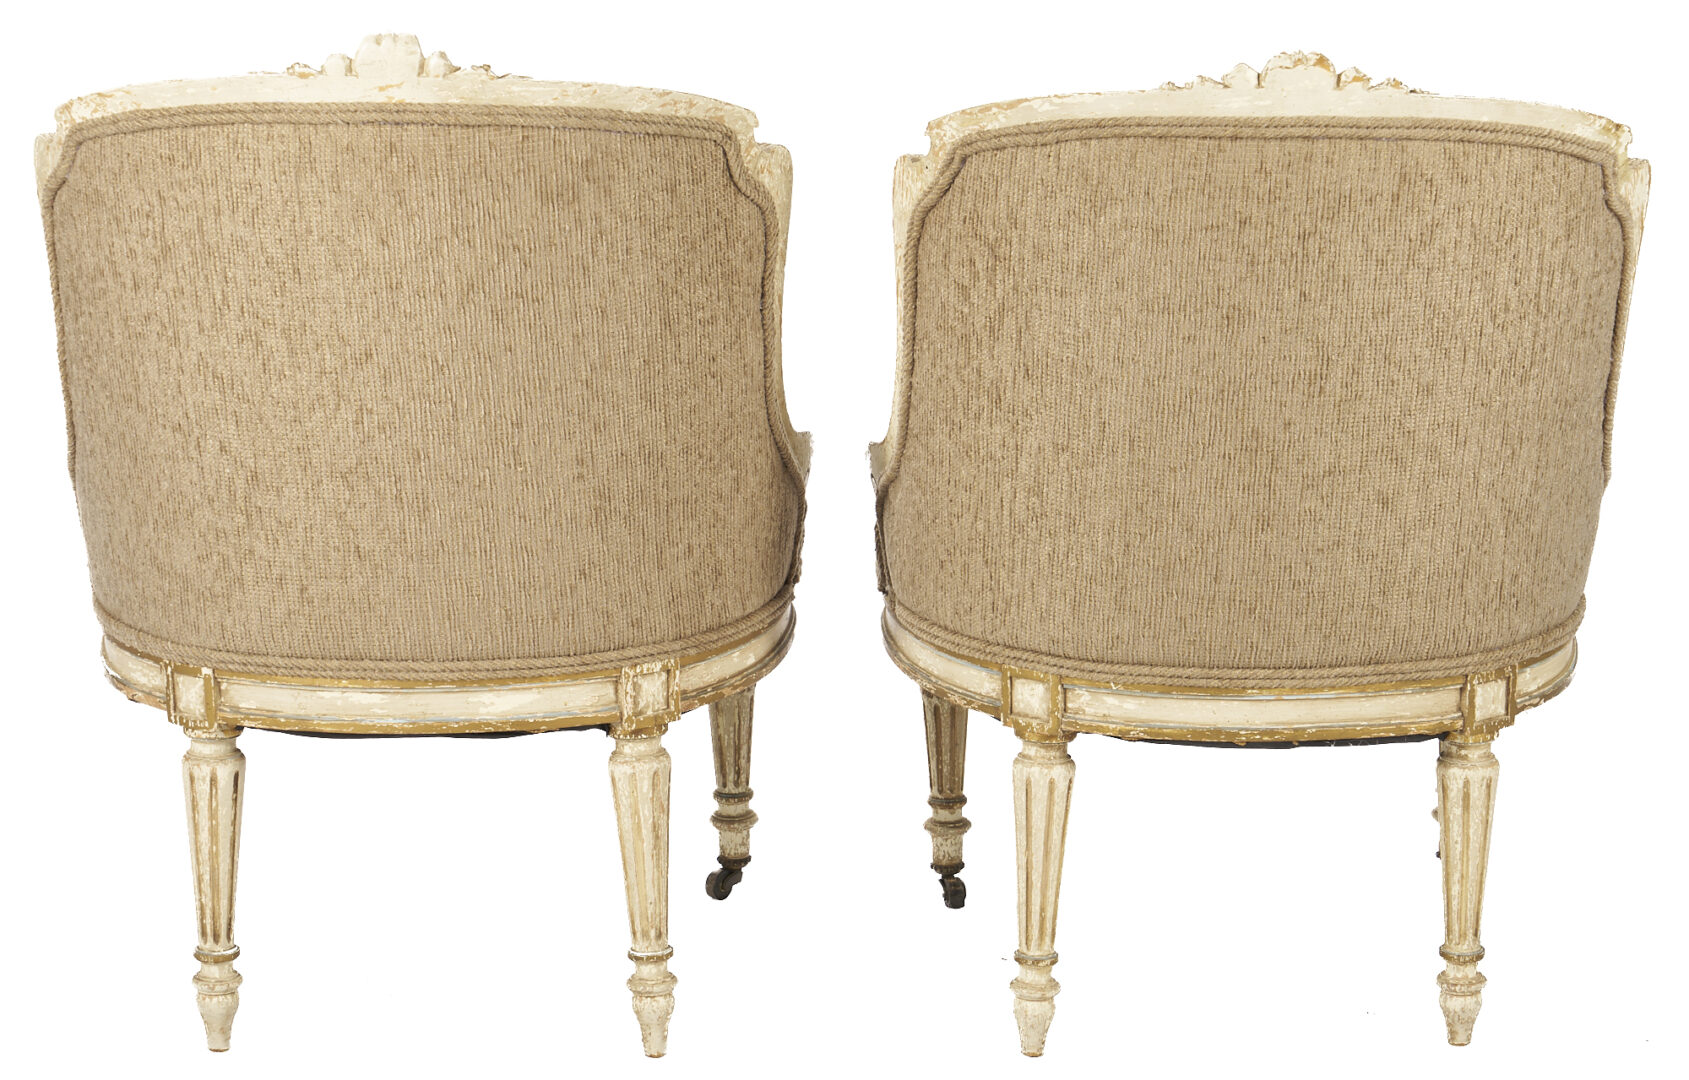 Lot 370: Pr. Of French Belle Epoque Upholstered Chairs